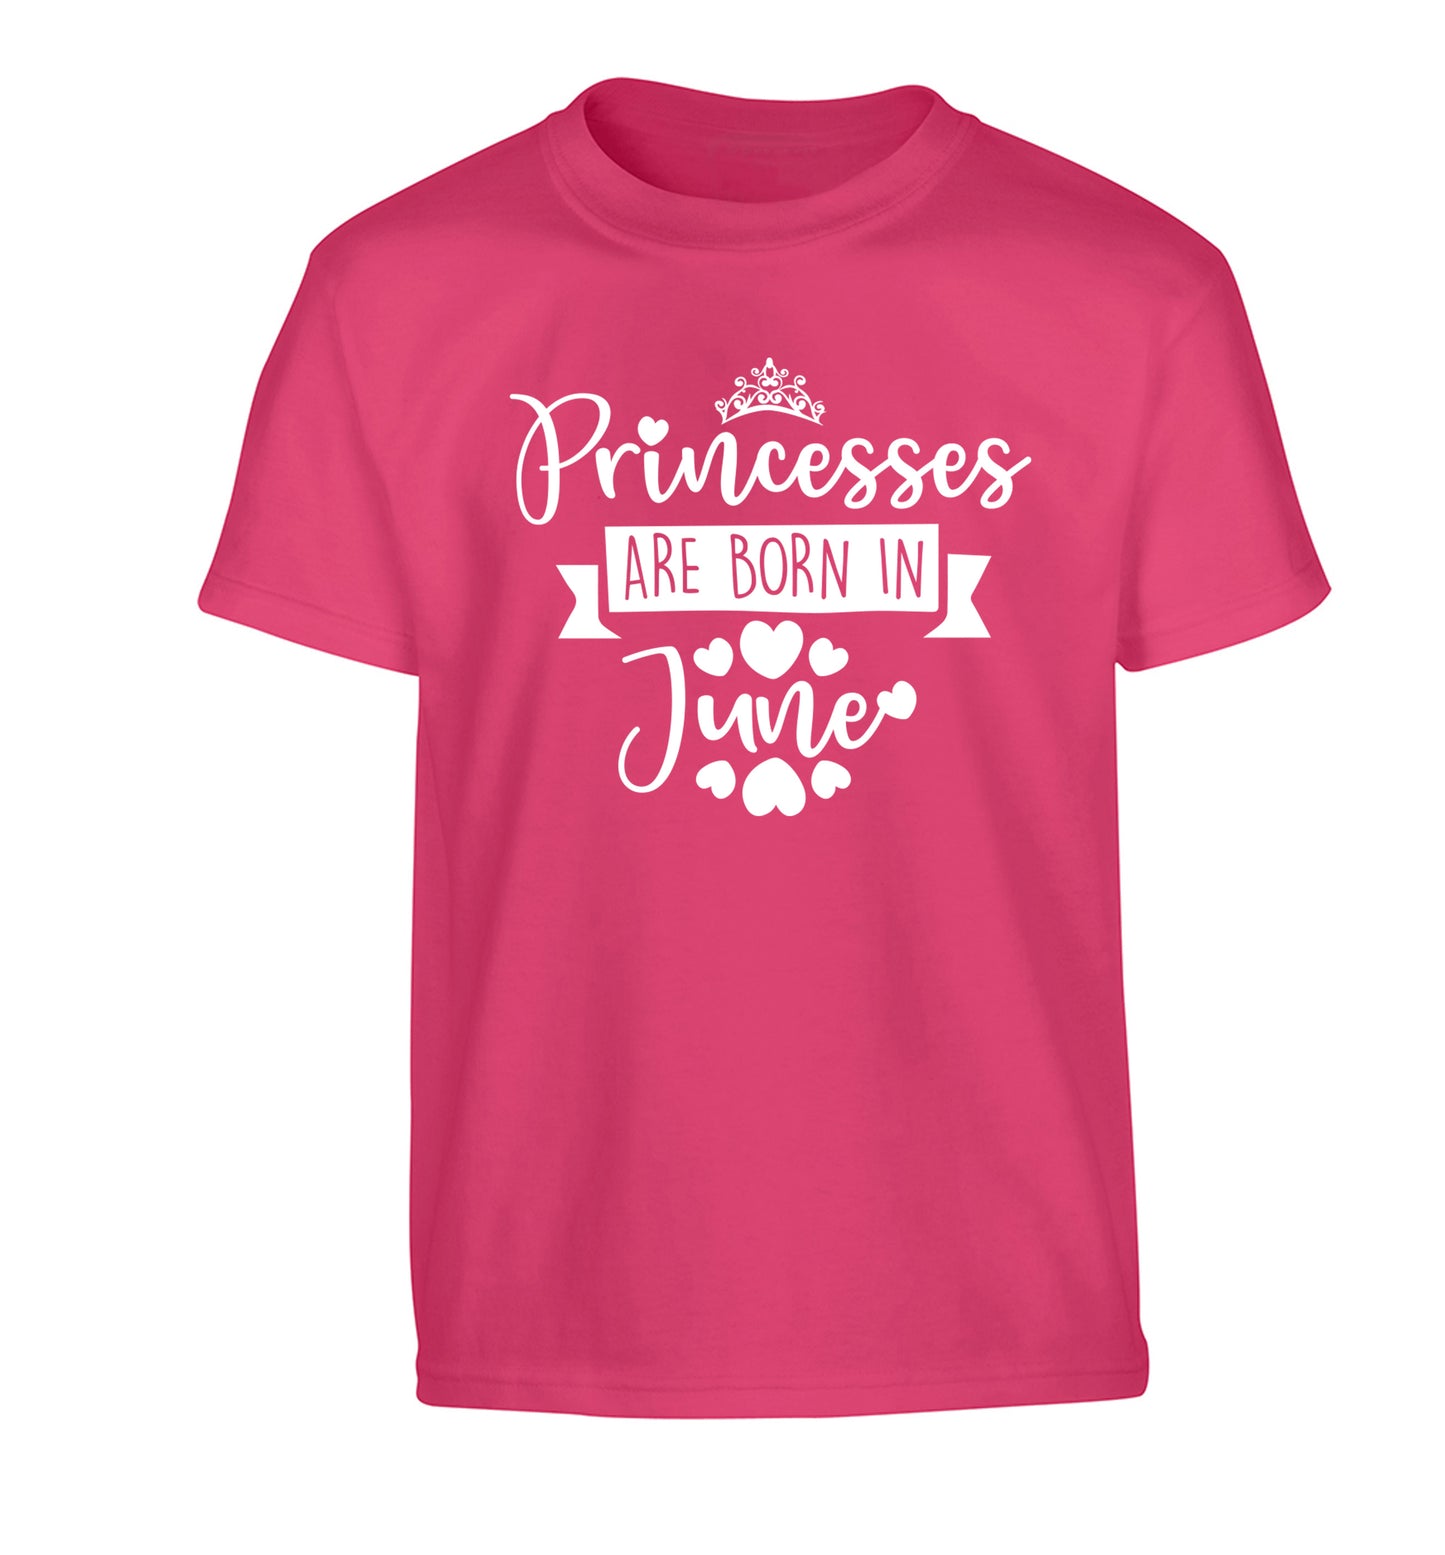 Princesses are born in June Children's pink Tshirt 12-13 Years